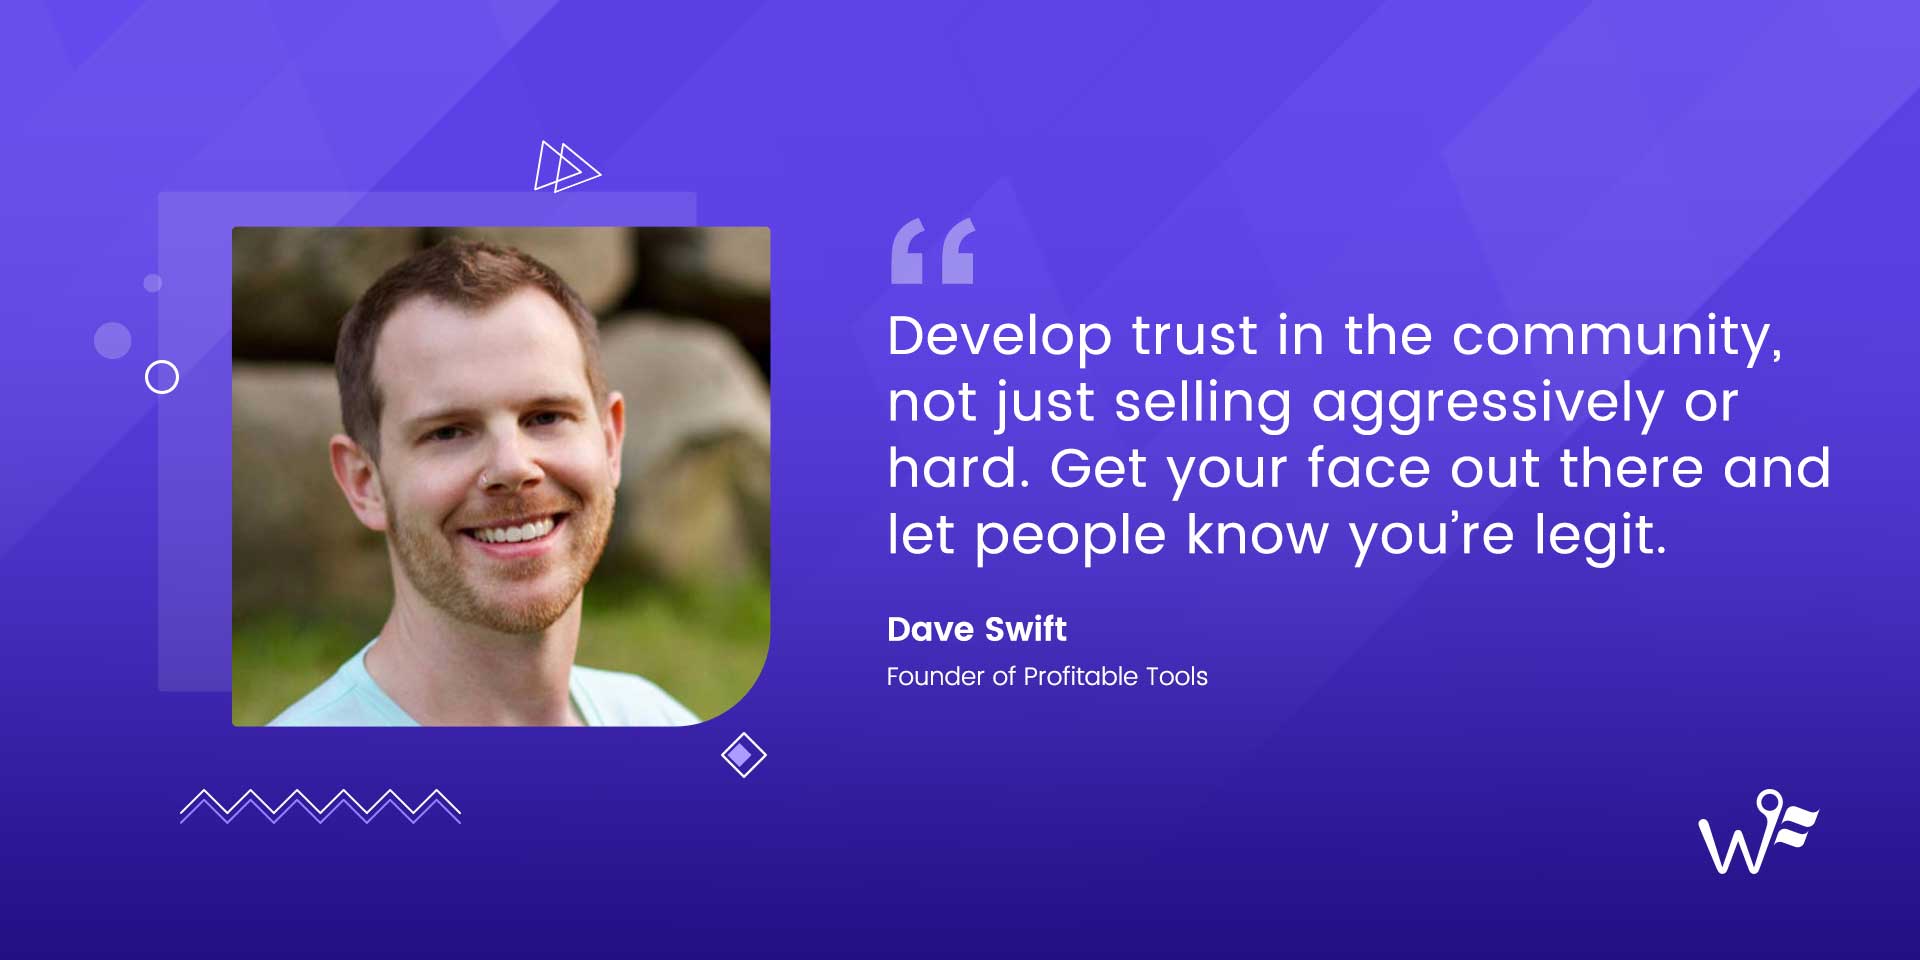 Dave Swift of Profitable Tools